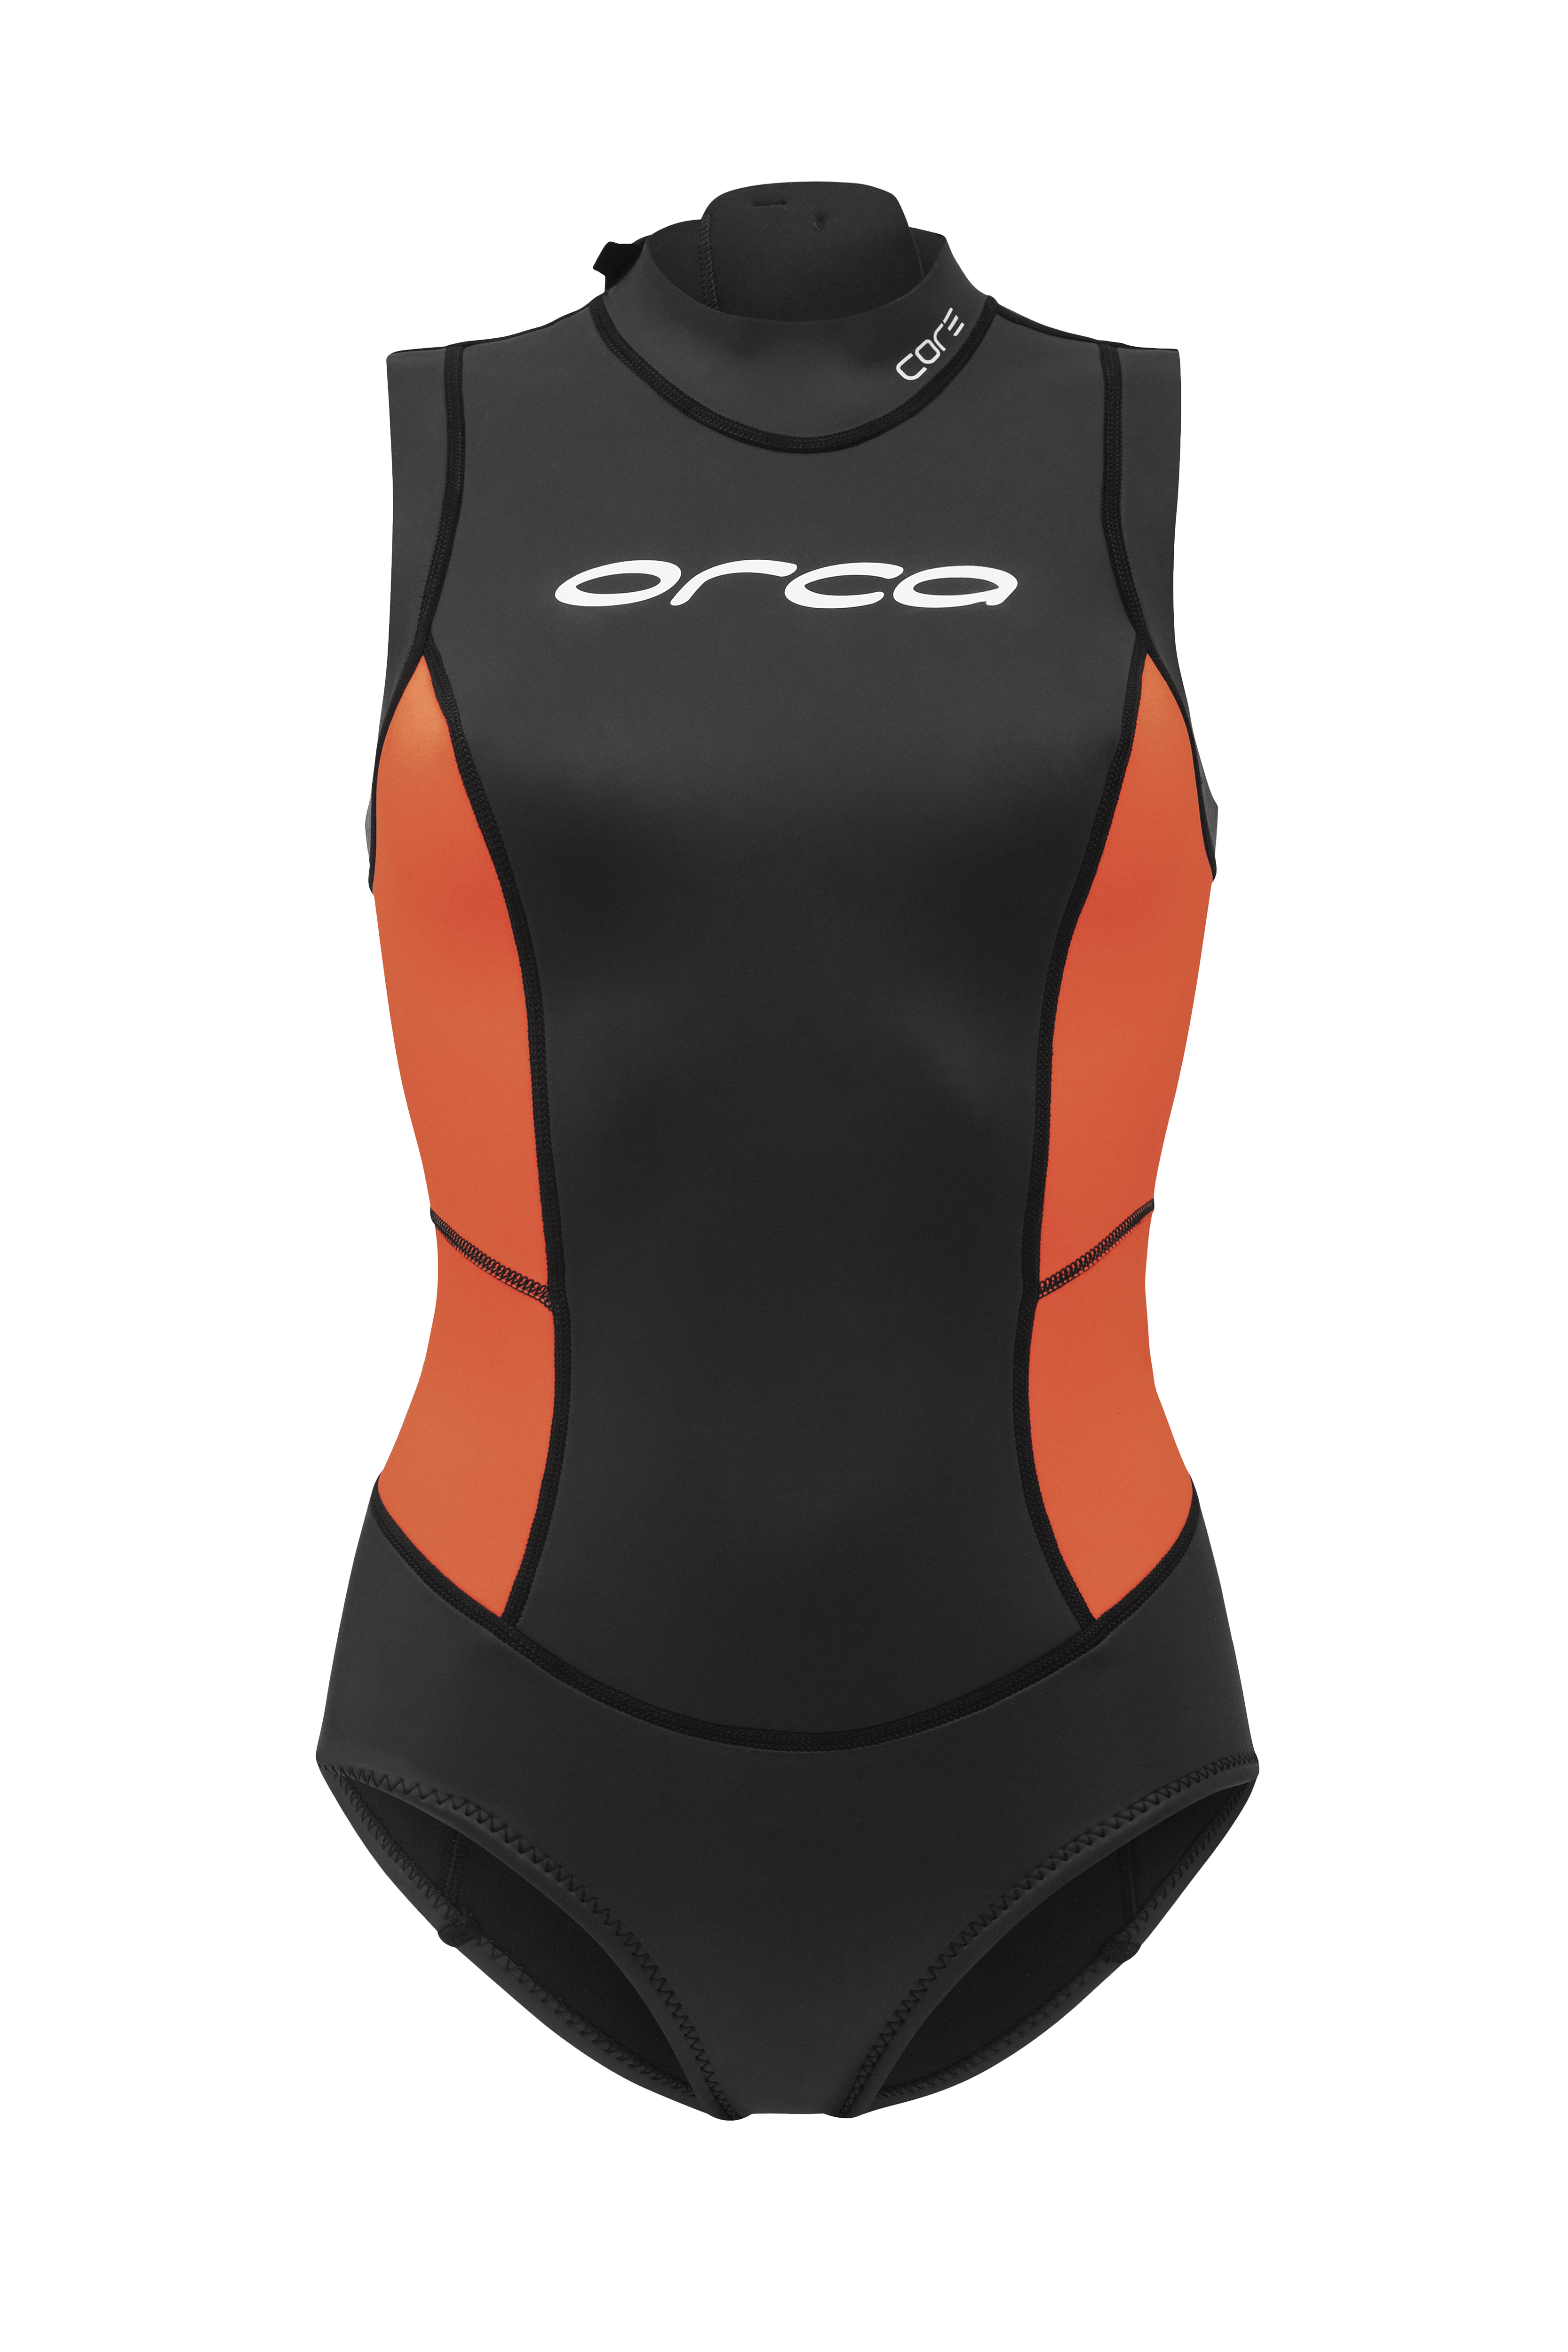 orca Ocean Swimming Openwater Core Swimskin Womens Wetsuit